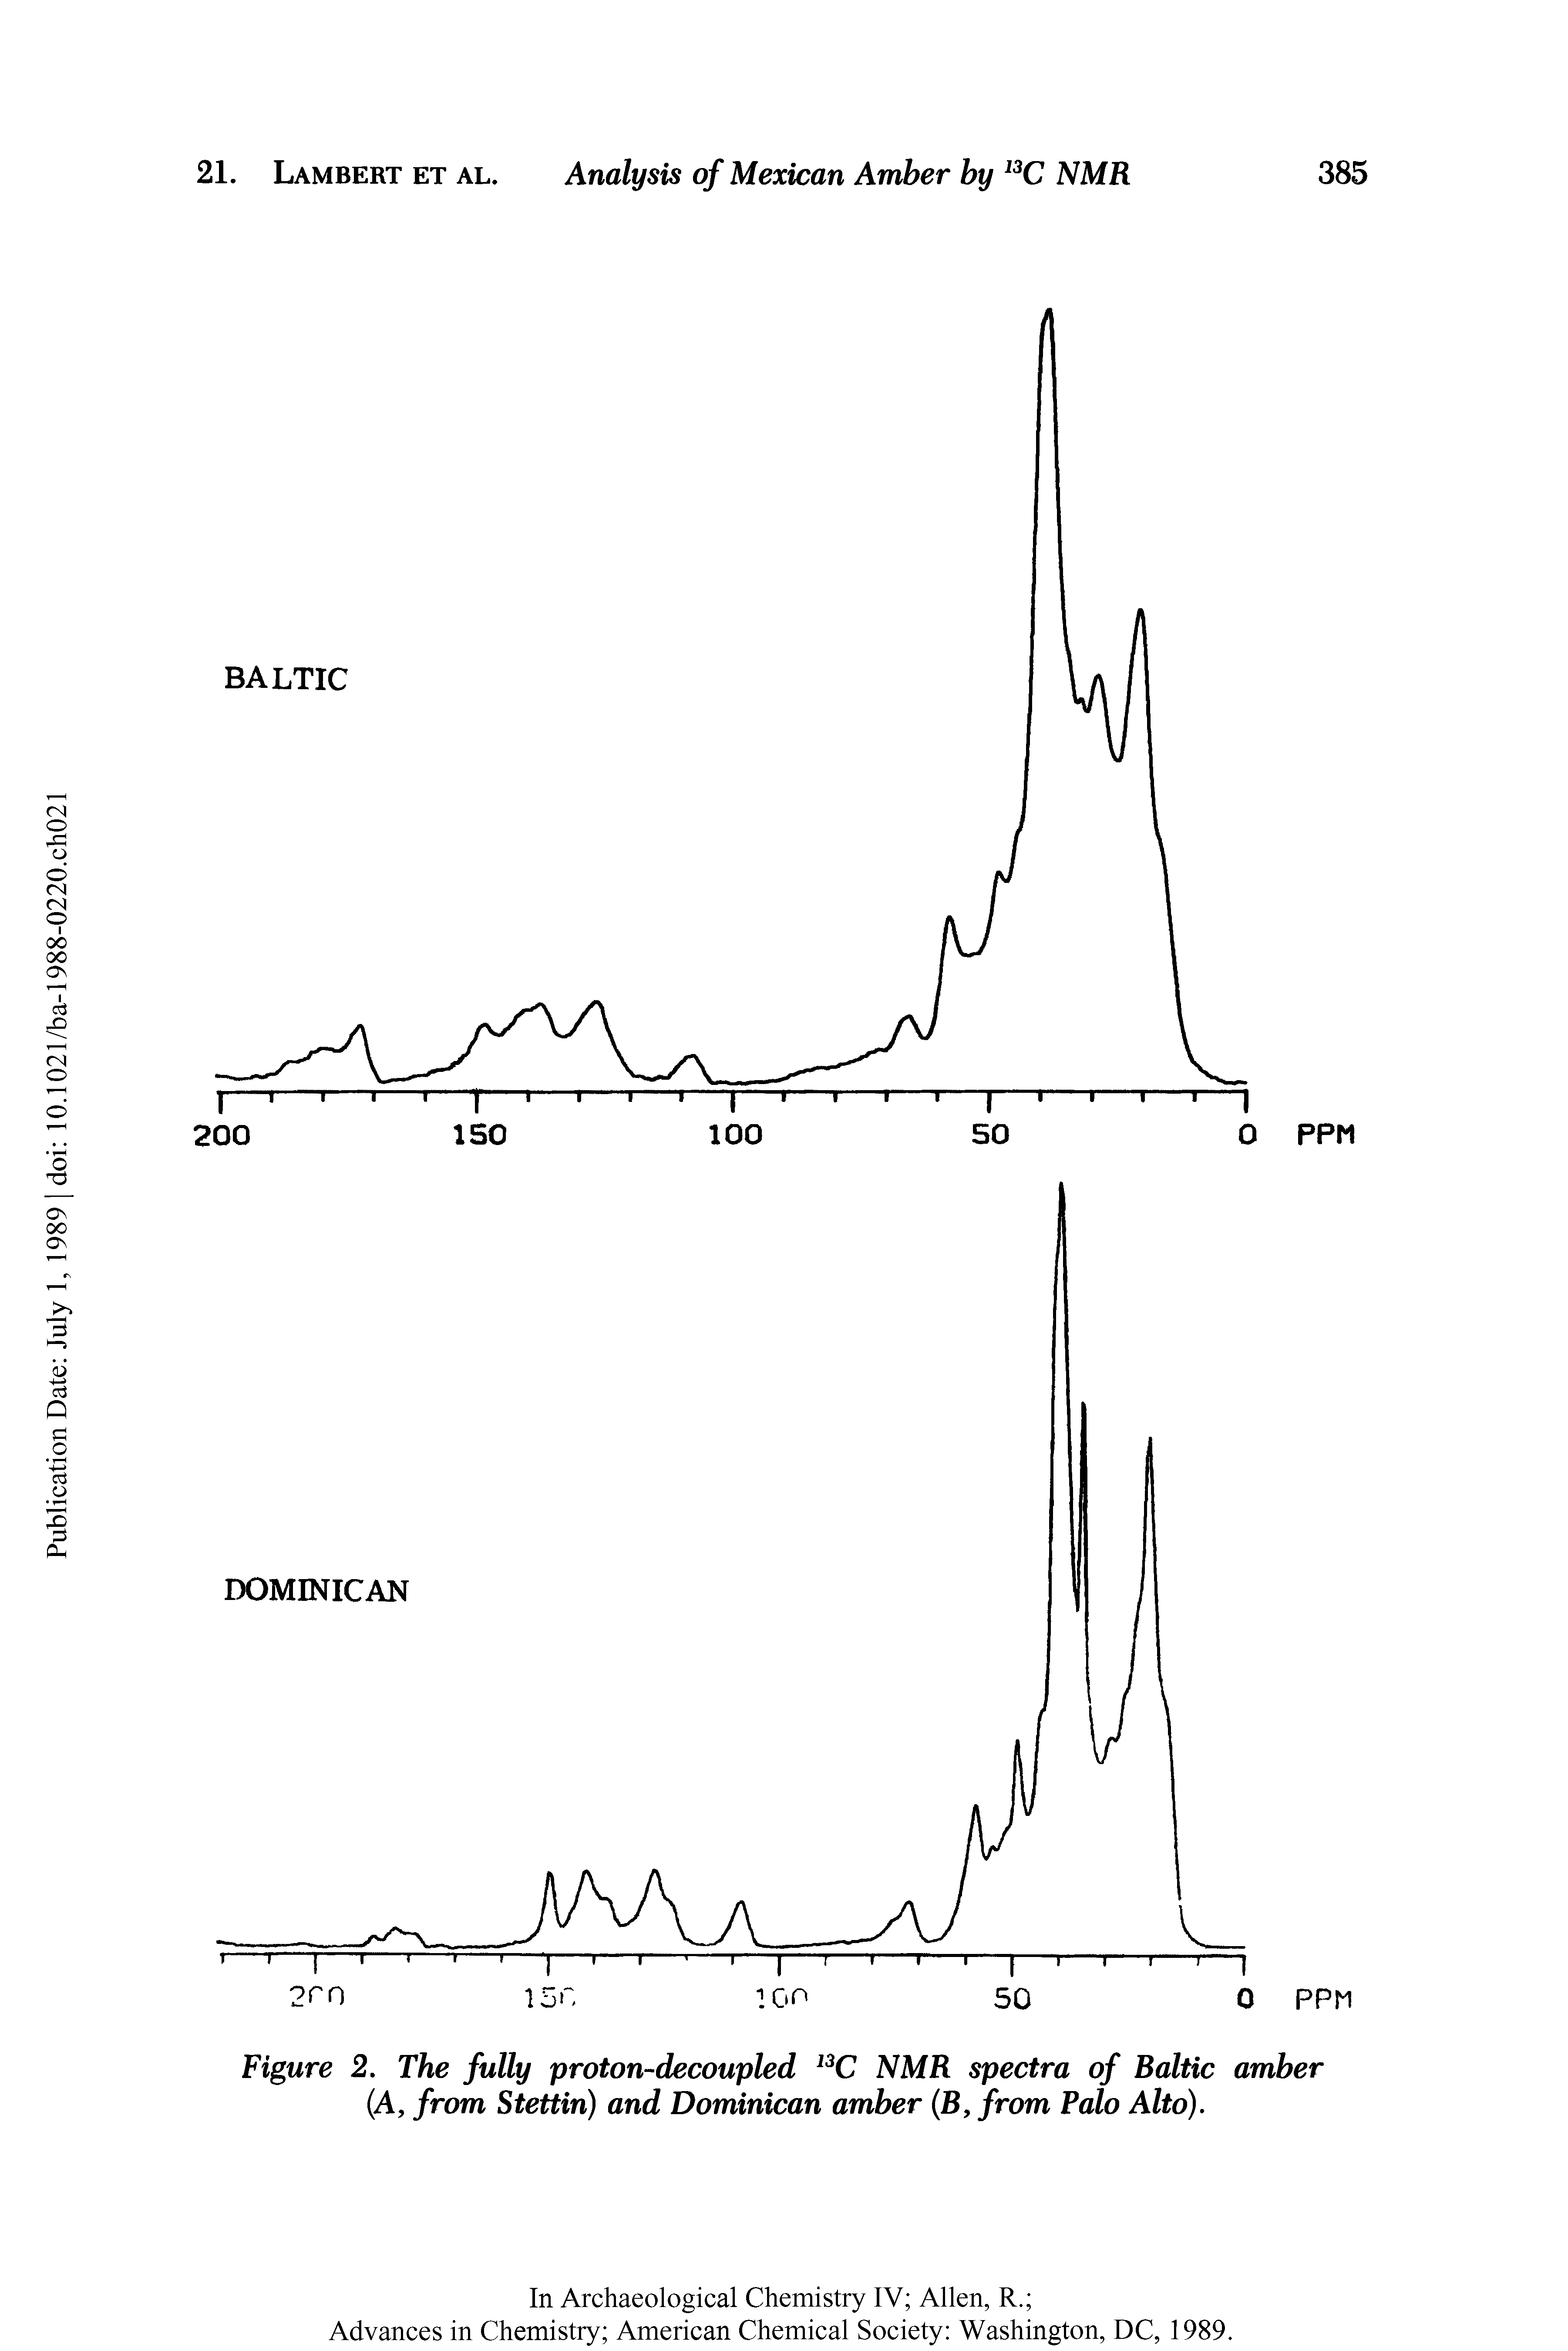 Figure 2. The fully proton-decoupled 13C NMR spectra of Raltic amber (A, from Stettin) and Dominican amber (B, from Palo Alto).